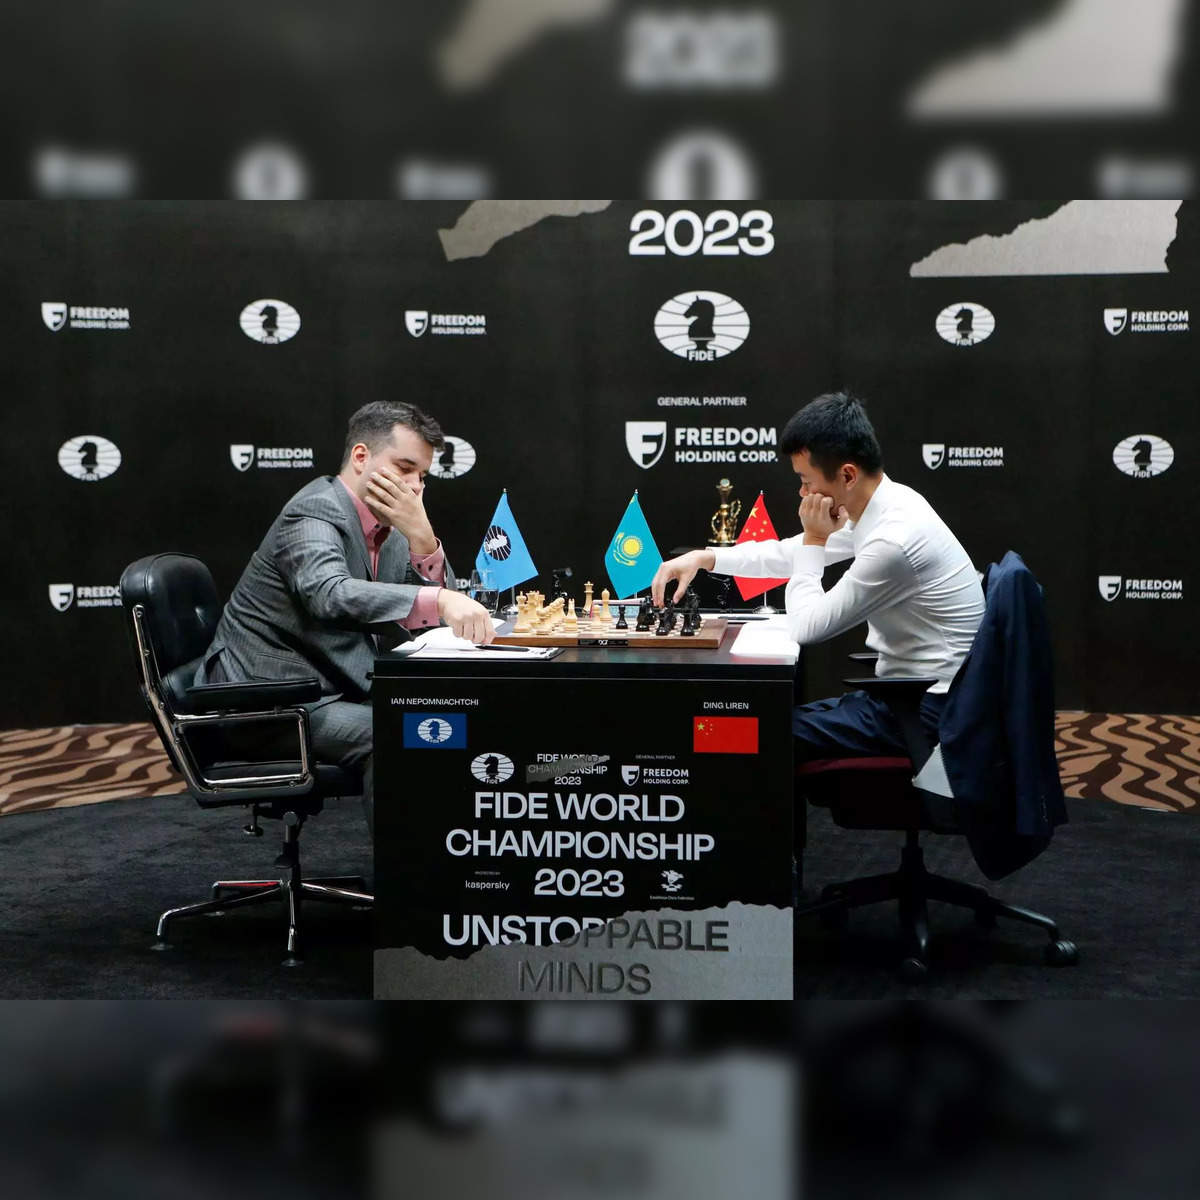 A Brief History of the French Defense in World Chess Championship Matches